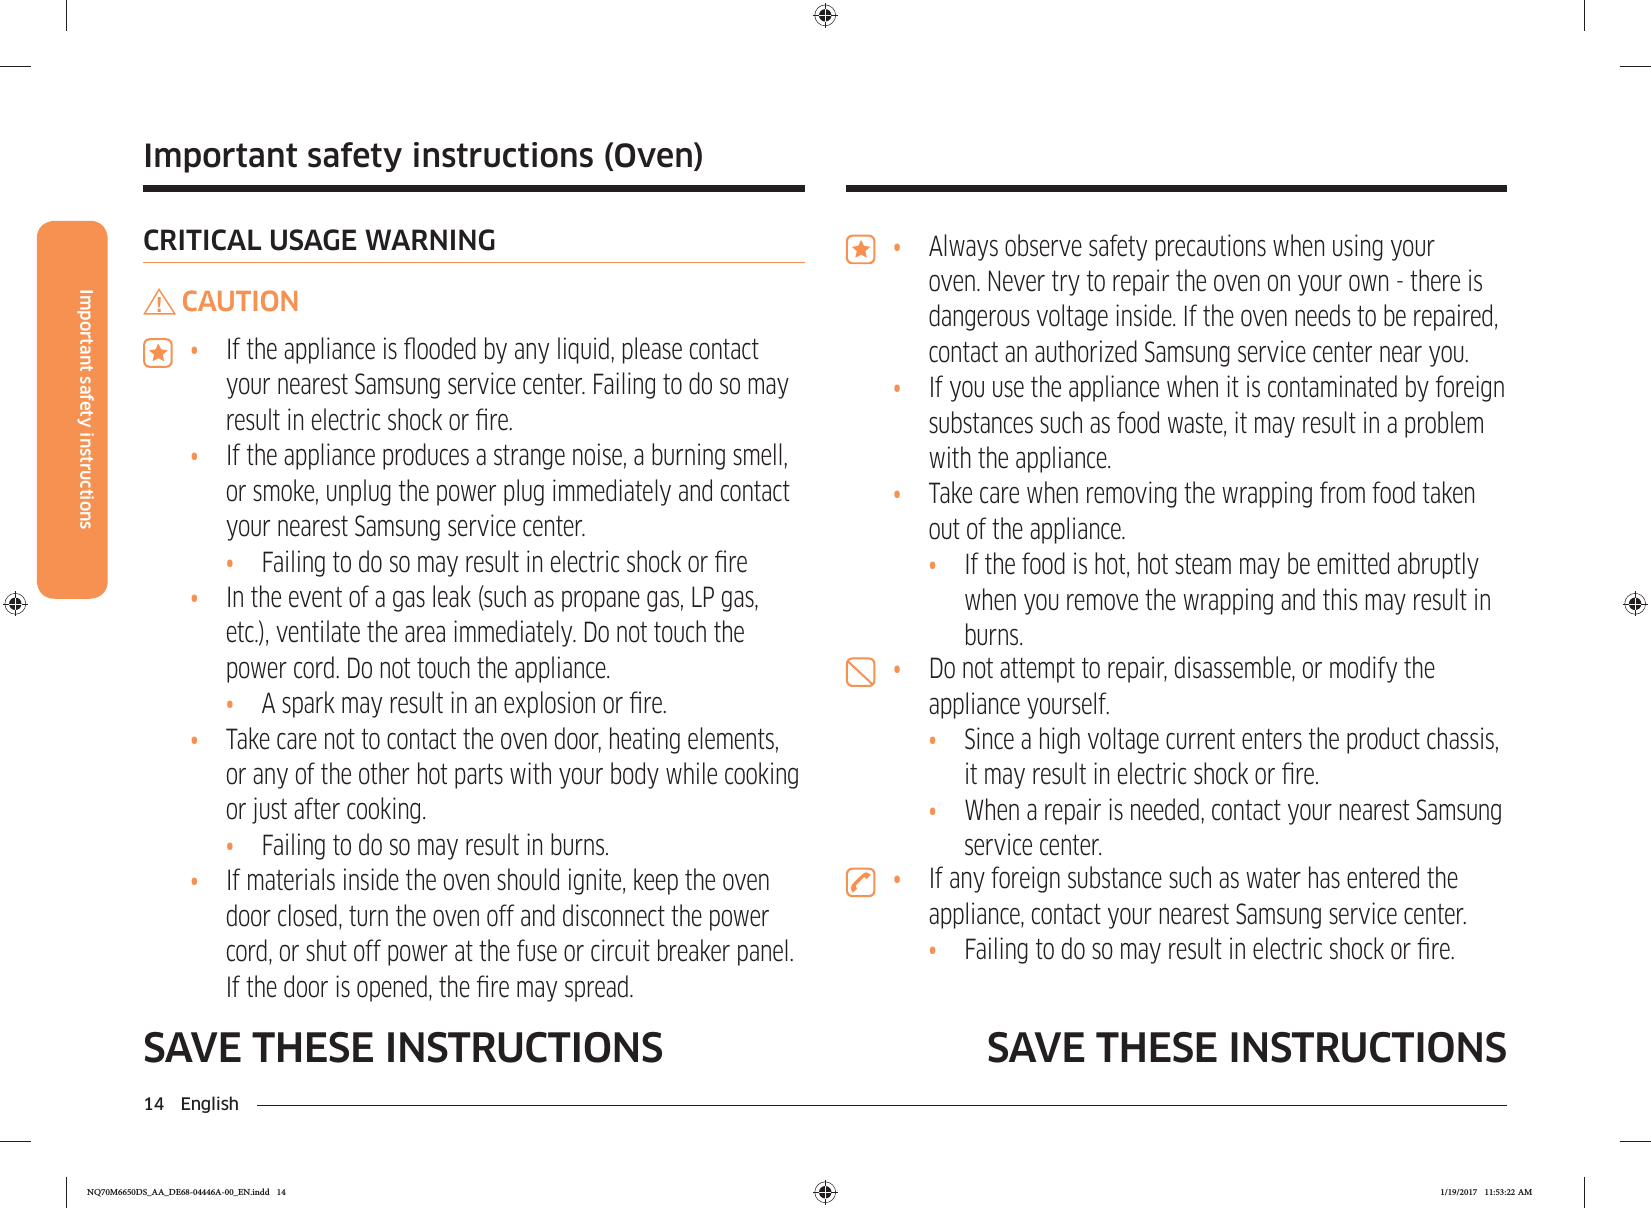 14 EnglishImportant safety instructionsSAVE THESE INSTRUCTIONS SAVE THESE INSTRUCTIONS•  Always observe safety precautions when using your oven. Never try to repair the oven on your own - there is dangerous voltage inside. If the oven needs to be repaired, contact an authorized Samsung service center near you.•  If you use the appliance when it is contaminated by foreign substances such as food waste, it may result in a problem with the appliance.•  Take care when removing the wrapping from food taken out of the appliance.•  If the food is hot, hot steam may be emitted abruptly when you remove the wrapping and this may result in burns.•  Do not attempt to repair, disassemble, or modify the appliance yourself.•  Since a high voltage current enters the product chassis, it may result in electric shock or re.•  When a repair is needed, contact your nearest Samsung service center.•  If any foreign substance such as water has entered the appliance, contact your nearest Samsung service center.•  Failing to do so may result in electric shock or re.CRITICAL USAGE WARNINGCAUTION•  If the appliance is ooded by any liquid, please contact your nearest Samsung service center. Failing to do so may result in electric shock or re.•  If the appliance produces a strange noise, a burning smell, or smoke, unplug the power plug immediately and contact your nearest Samsung service center.•  Failing to do so may result in electric shock or re•  In the event of a gas leak (such as propane gas, LP gas, etc.), ventilate the area immediately. Do not touch the power cord. Do not touch the appliance.•  A spark may result in an explosion or re.•  Take care not to contact the oven door, heating elements, or any of the other hot parts with your body while cooking or just after cooking.•  Failing to do so may result in burns.•  If materials inside the oven should ignite, keep the oven door closed, turn the oven off and disconnect the power cord, or shut off power at the fuse or circuit breaker panel. If the door is opened, the re may spread.Important safety instructions (Oven)NQ70M6650DS_AA_DE68-04446A-00_EN.indd   14 1/19/2017   11:53:22 AM